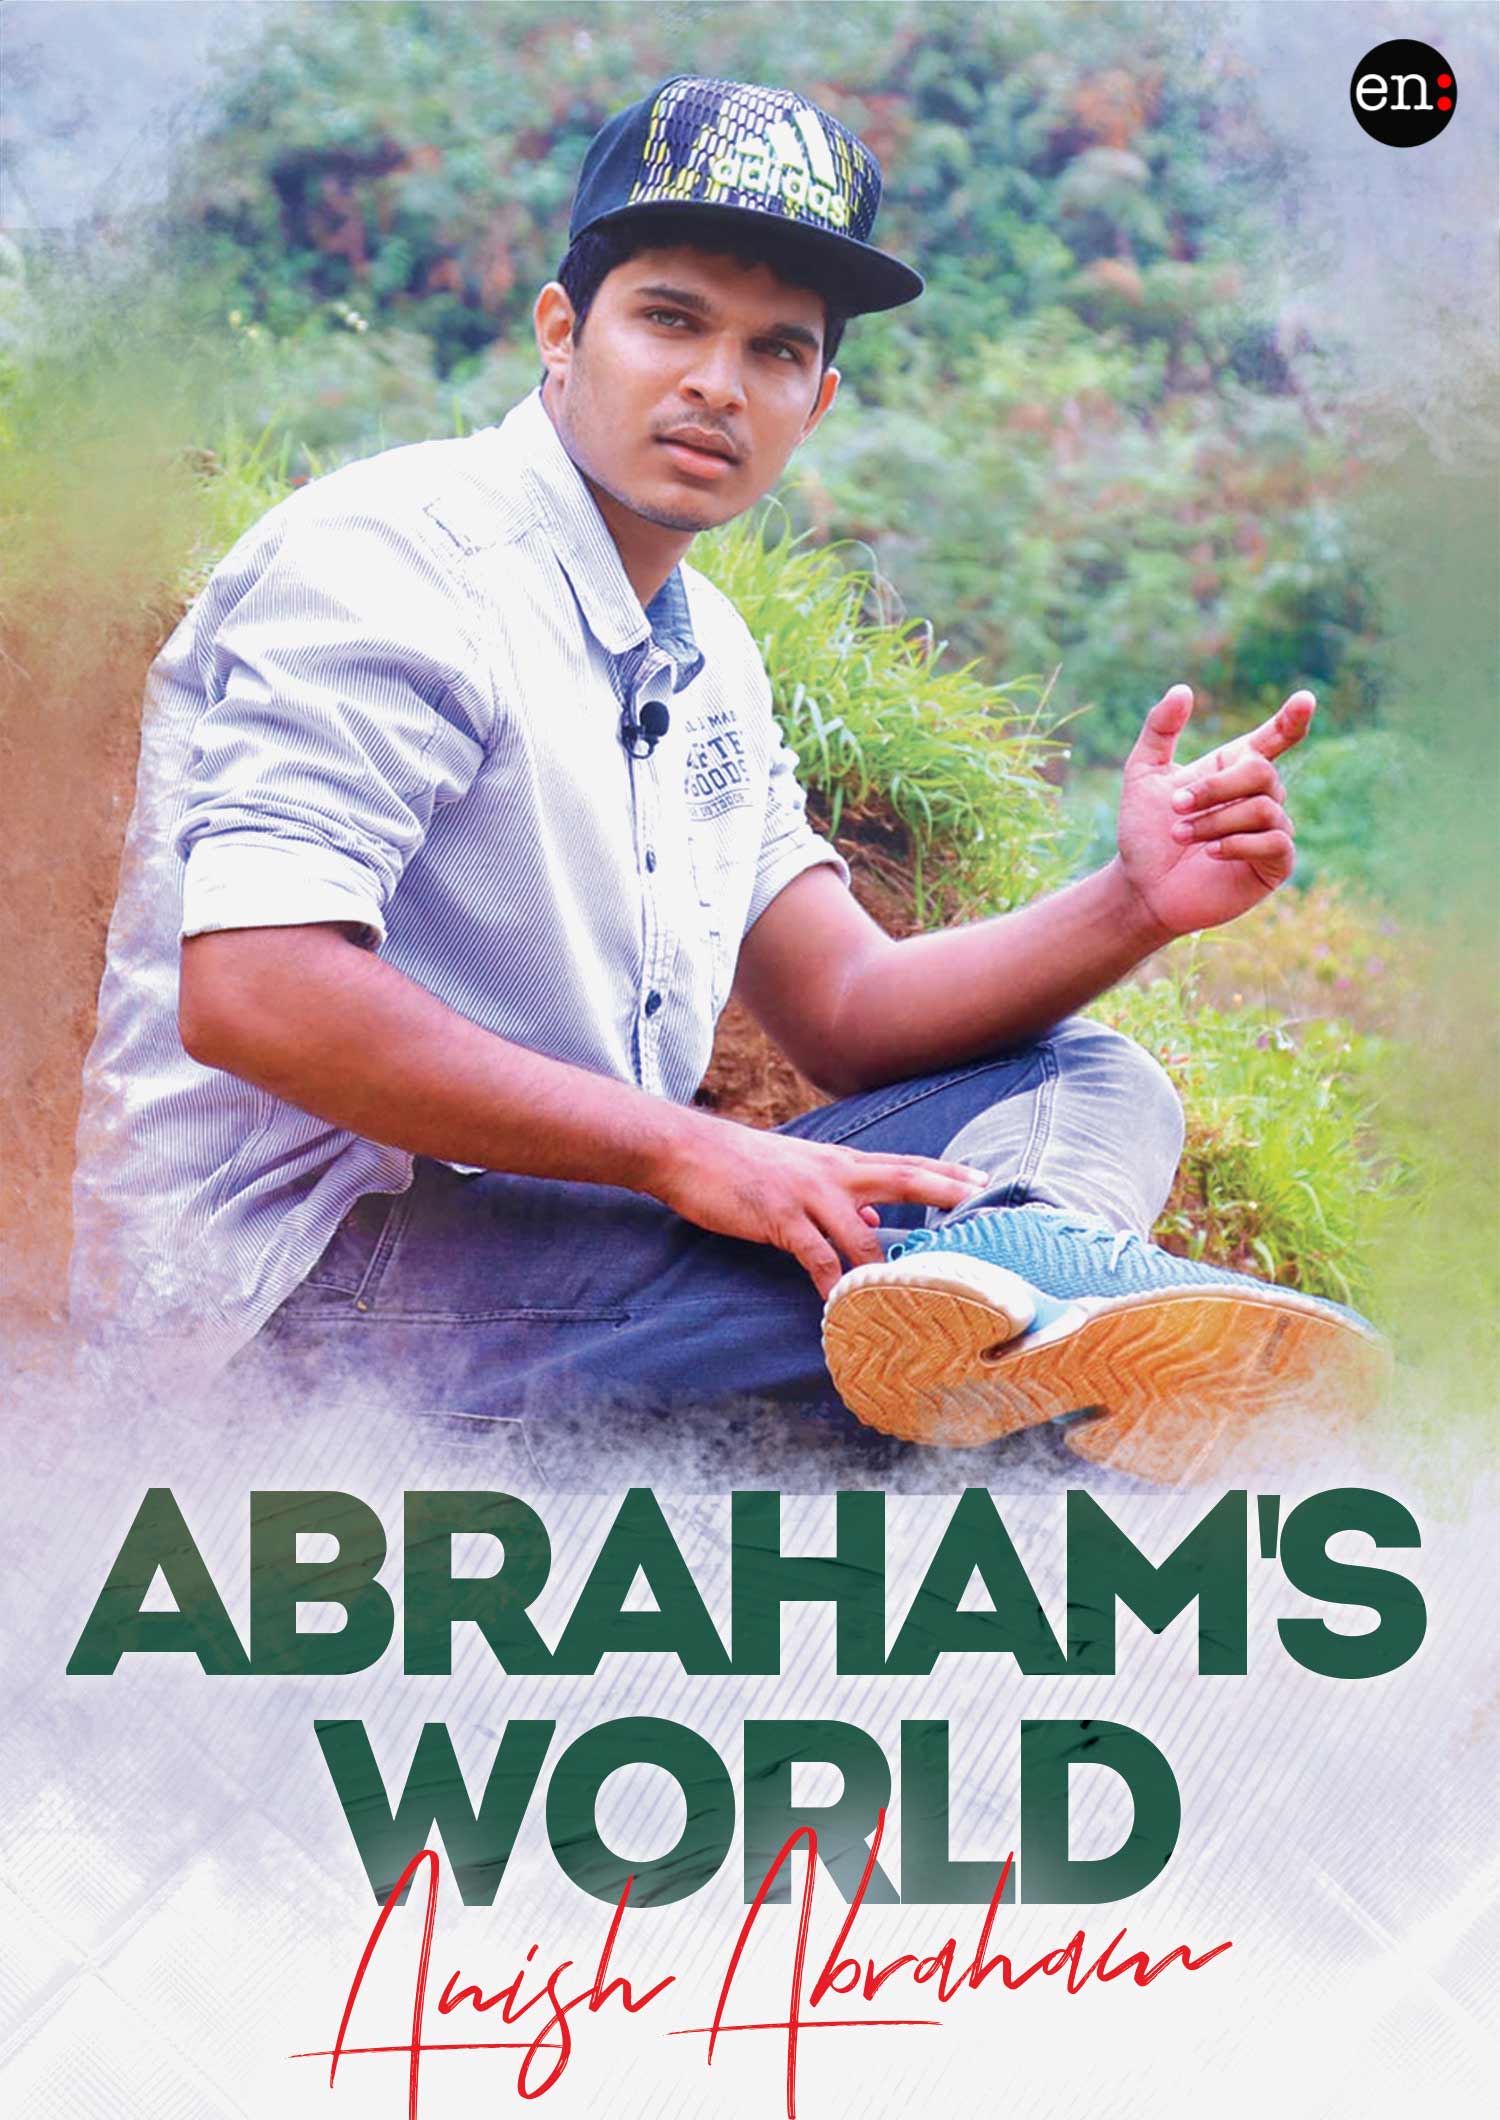 Abrahams World - Contact Number, Phone Number, Mobile Number, Whatsapp Number, Email Address and Website